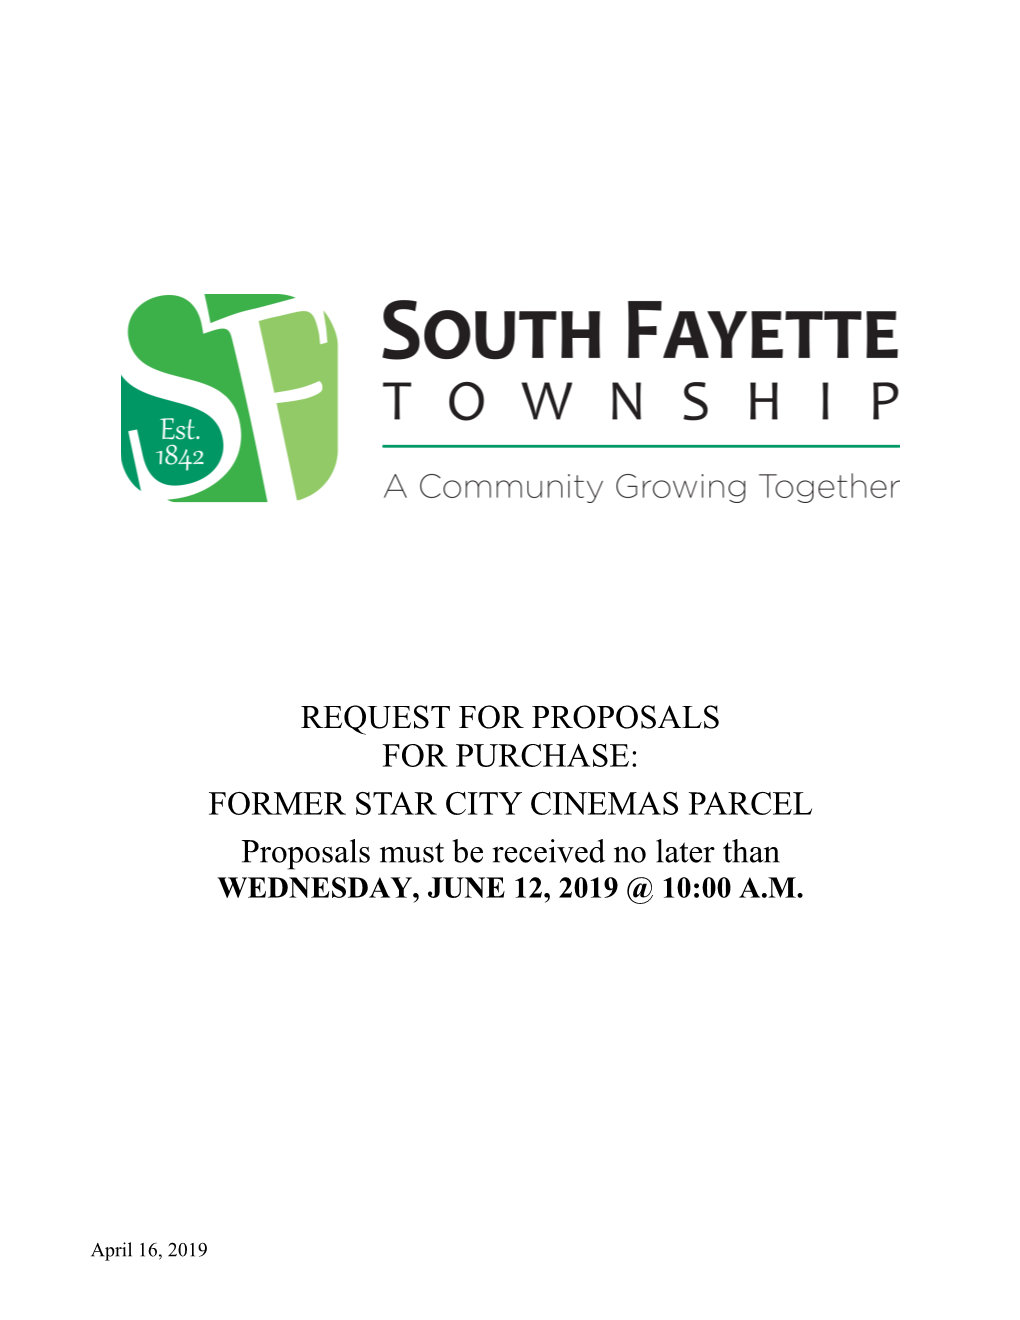 REQUEST for PROPOSALS for PURCHASE: FORMER STAR CITY CINEMAS PARCEL Proposals Must Be Received No Later Than WEDNESDAY, JUNE 12, 2019 @ 10:00 A.M